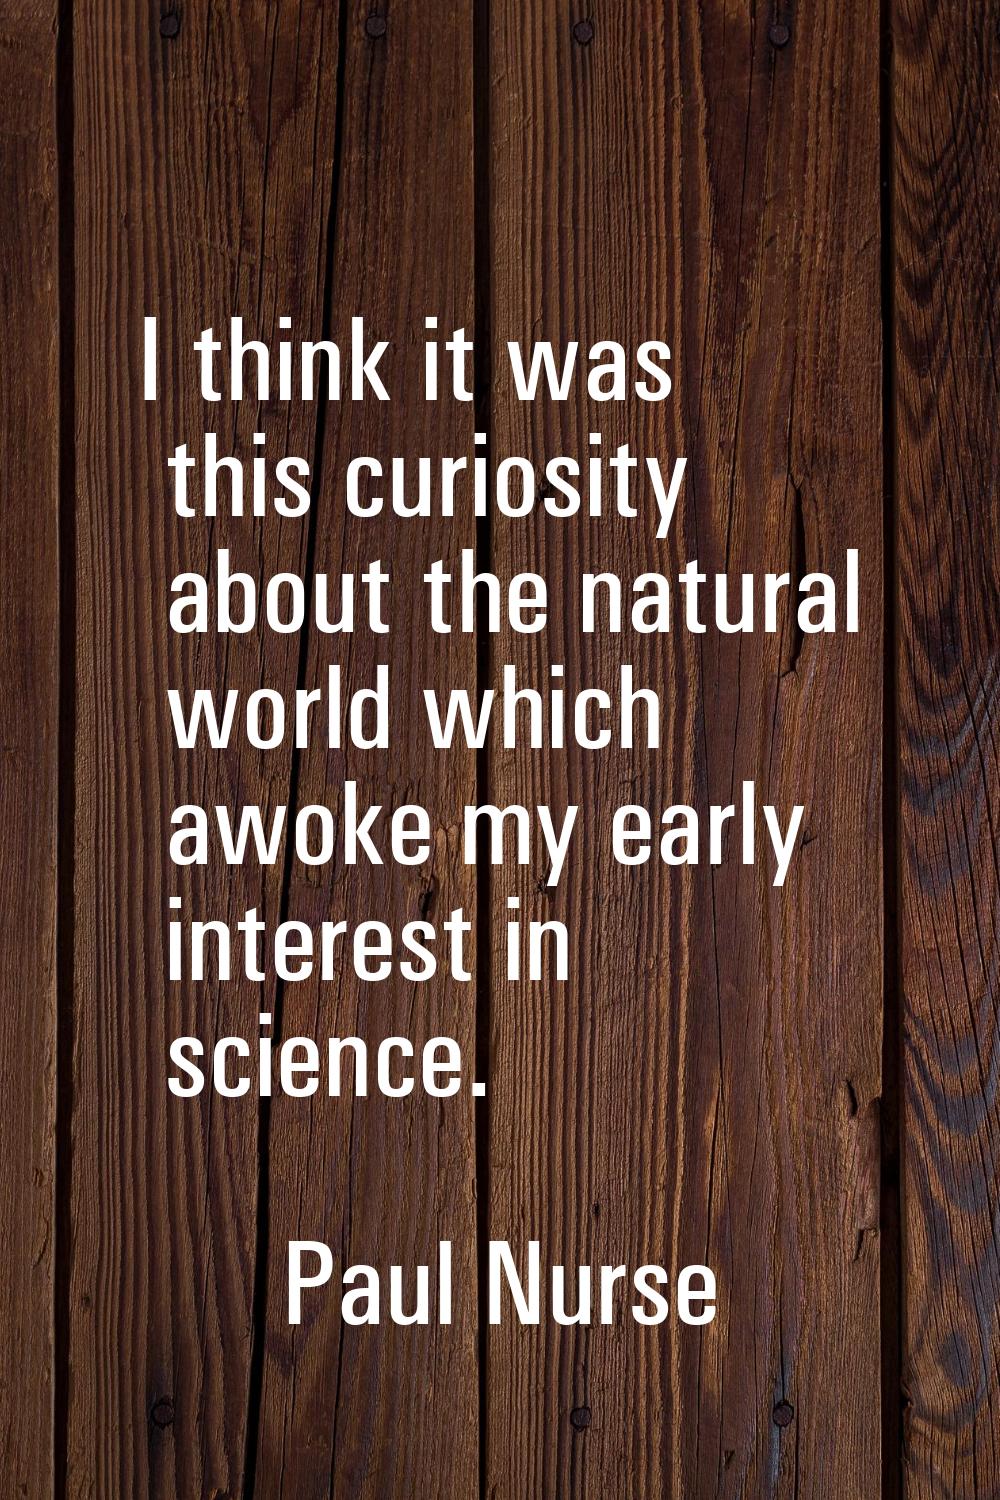 I think it was this curiosity about the natural world which awoke my early interest in science.